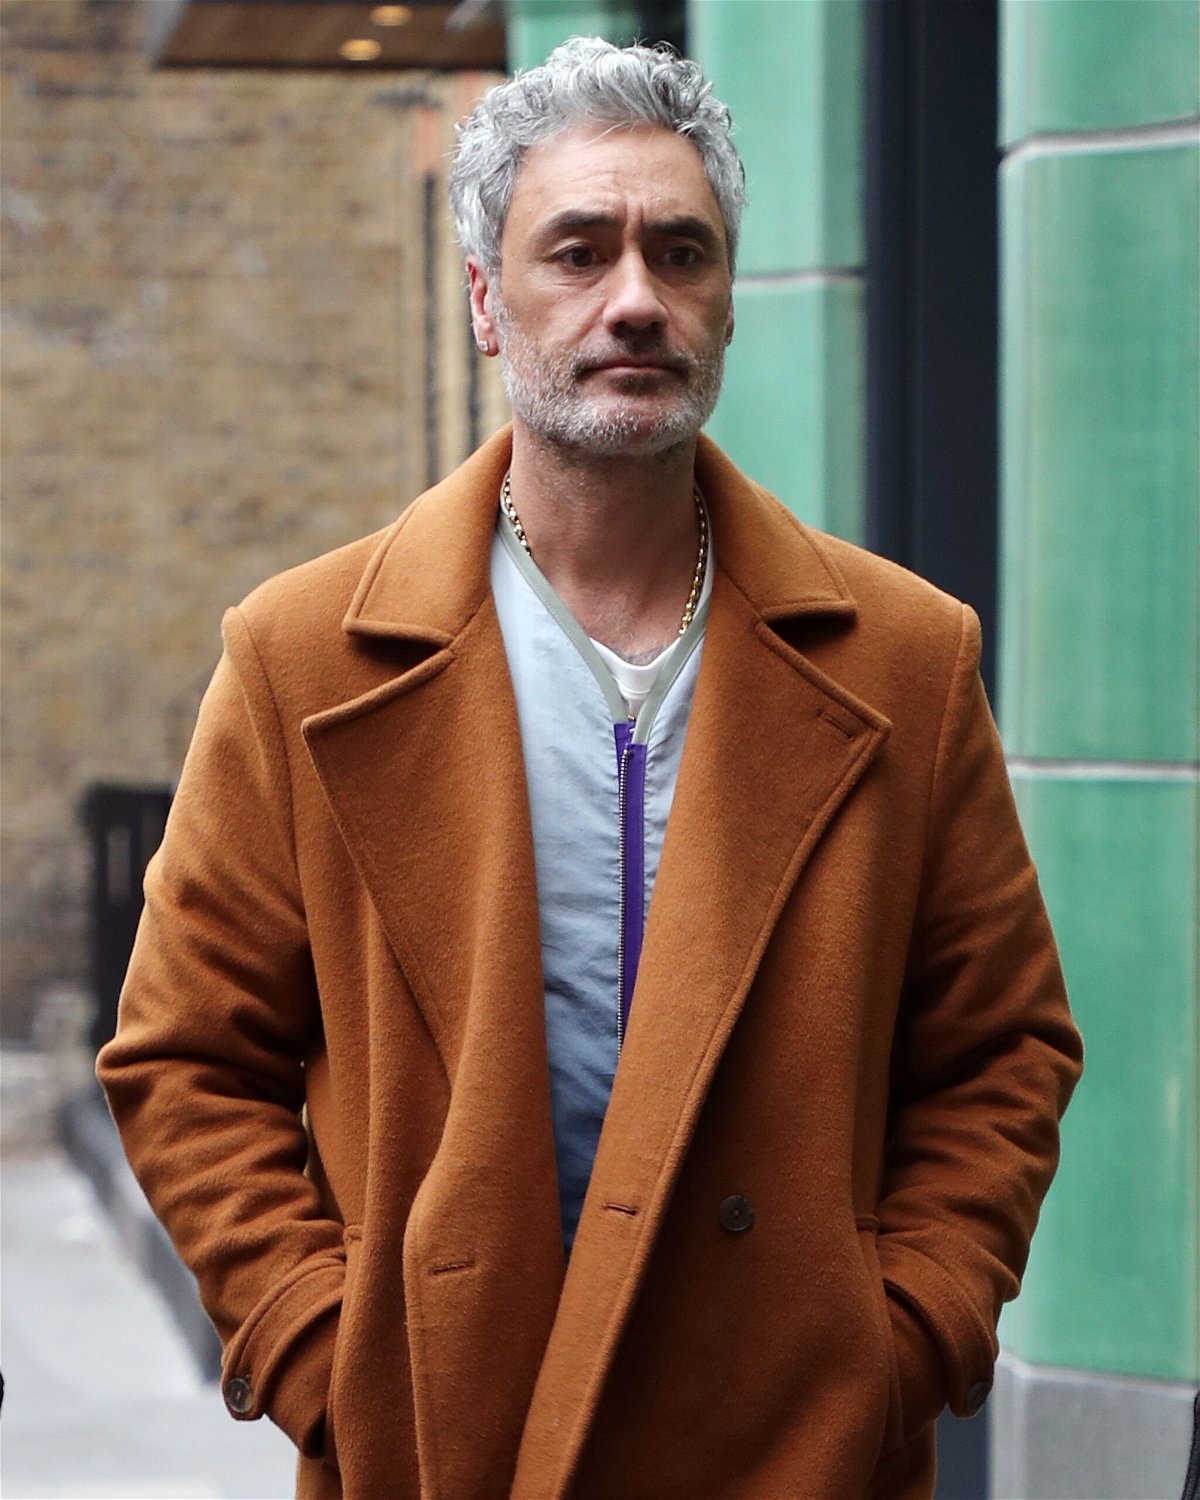 <i>Neil Mockford/GC Images/Getty Images</i><br/>Taika Waititi is pictured in London in November. Waititi doesn’t mind getting super candid about why he joined the Marvel Universe with 2017’s “Thor: Ragnarok.”